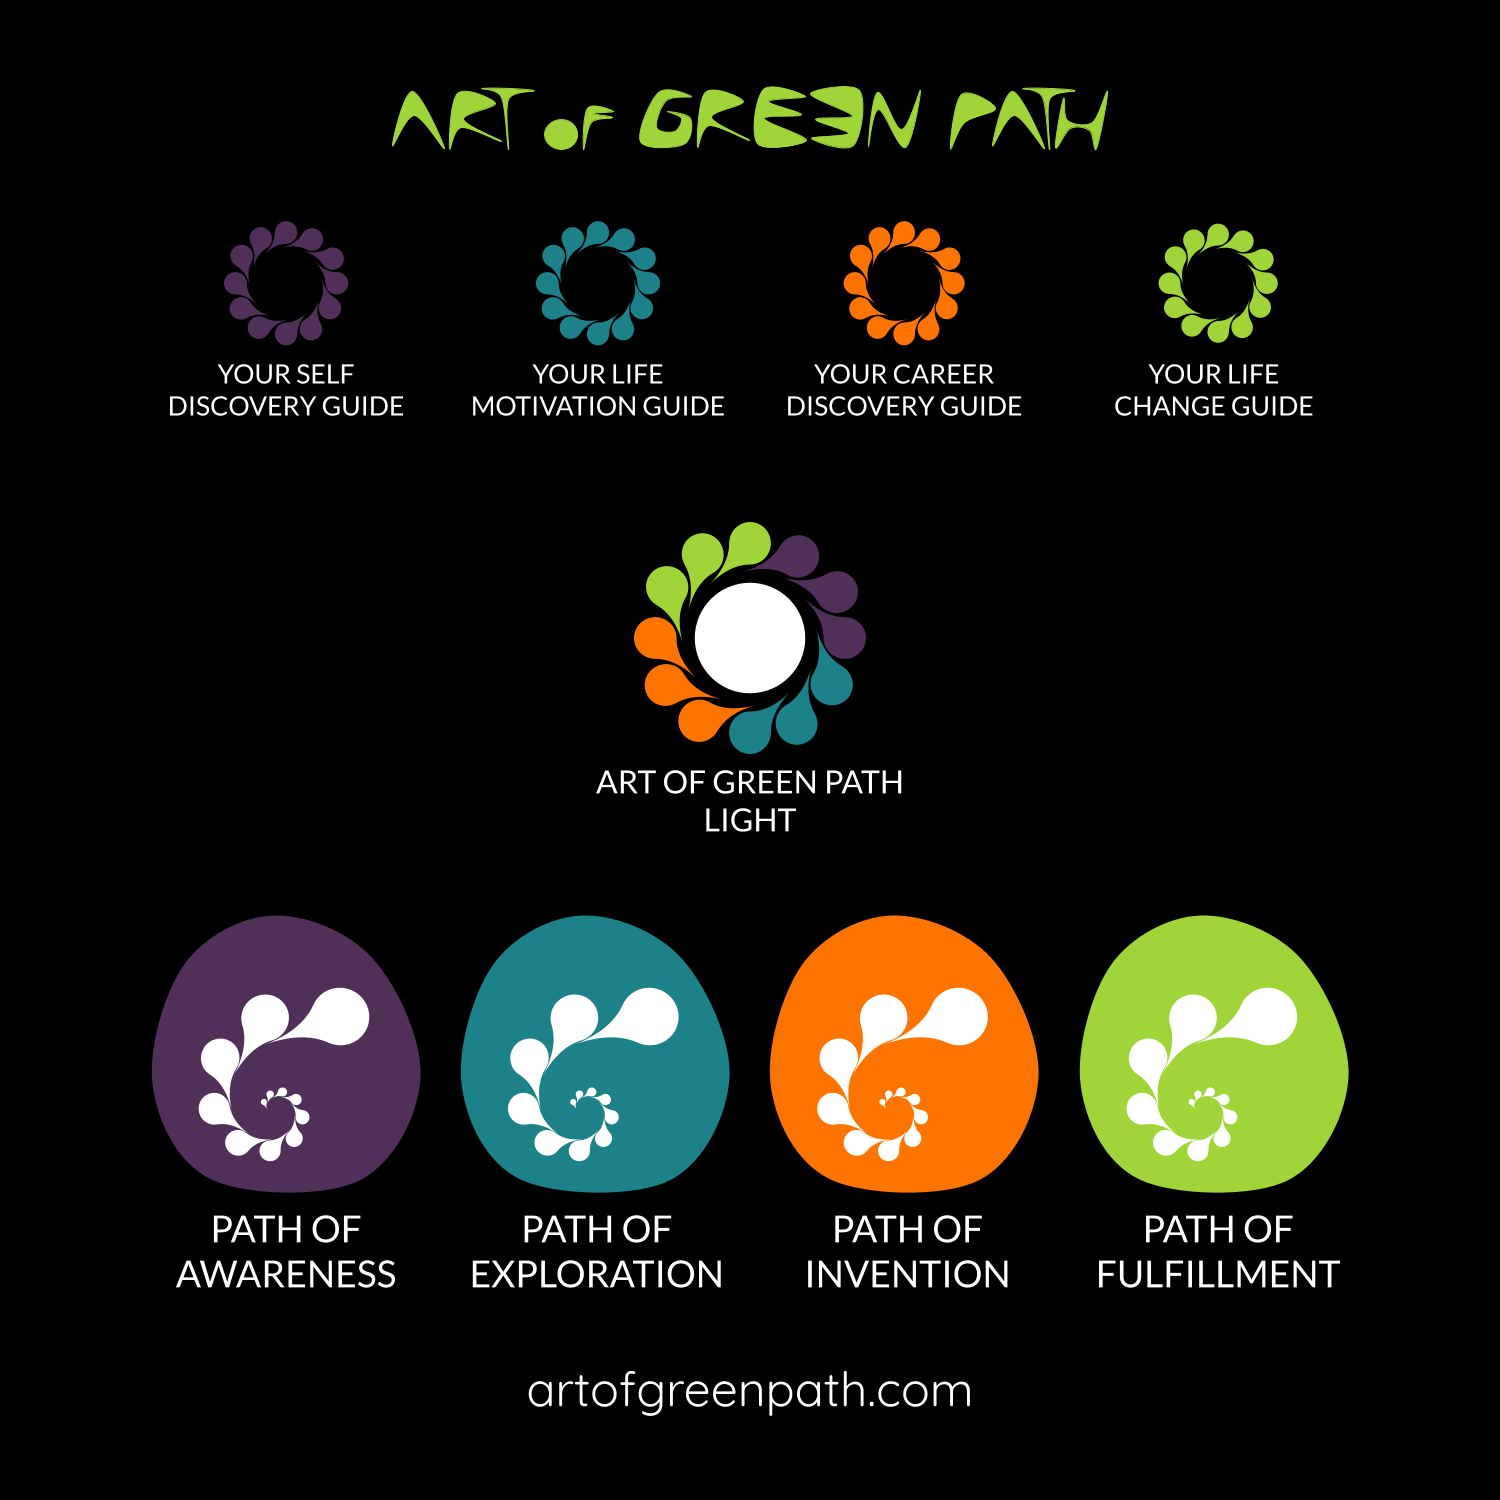  Art Of Green Path Ecosystem - LIGHT and EXPERIENCE